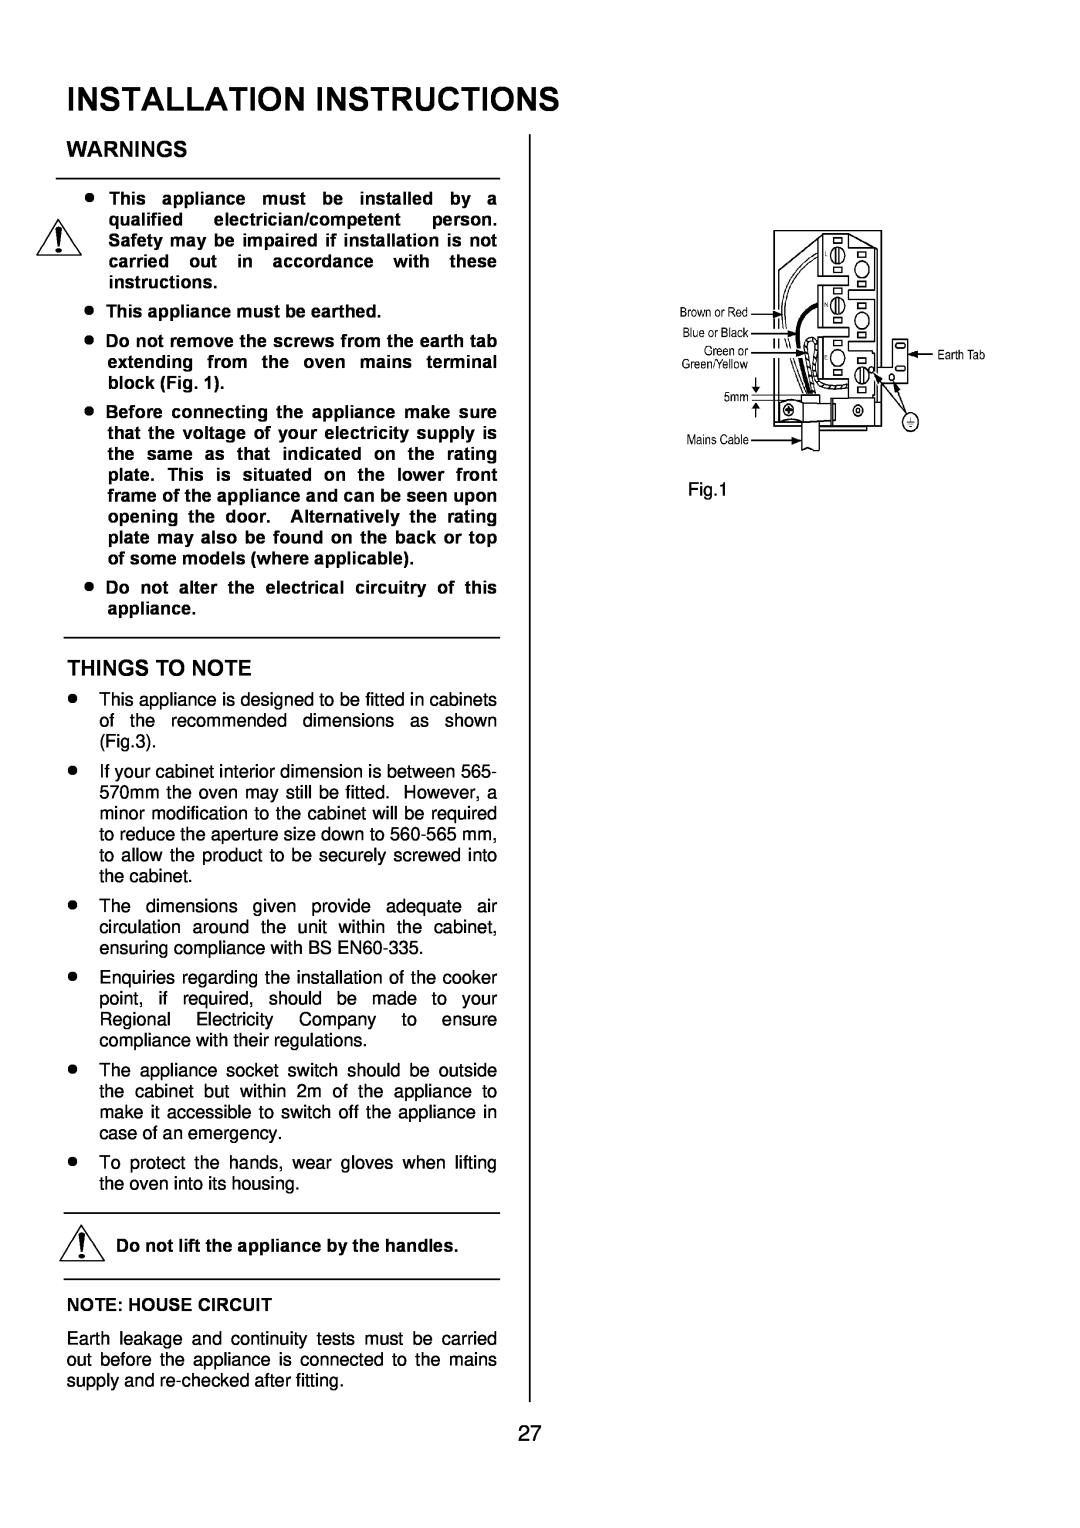 Tricity Bendix TBD950 Installation Instructions, Warnings, Things To Note, This appliance must be earthed 